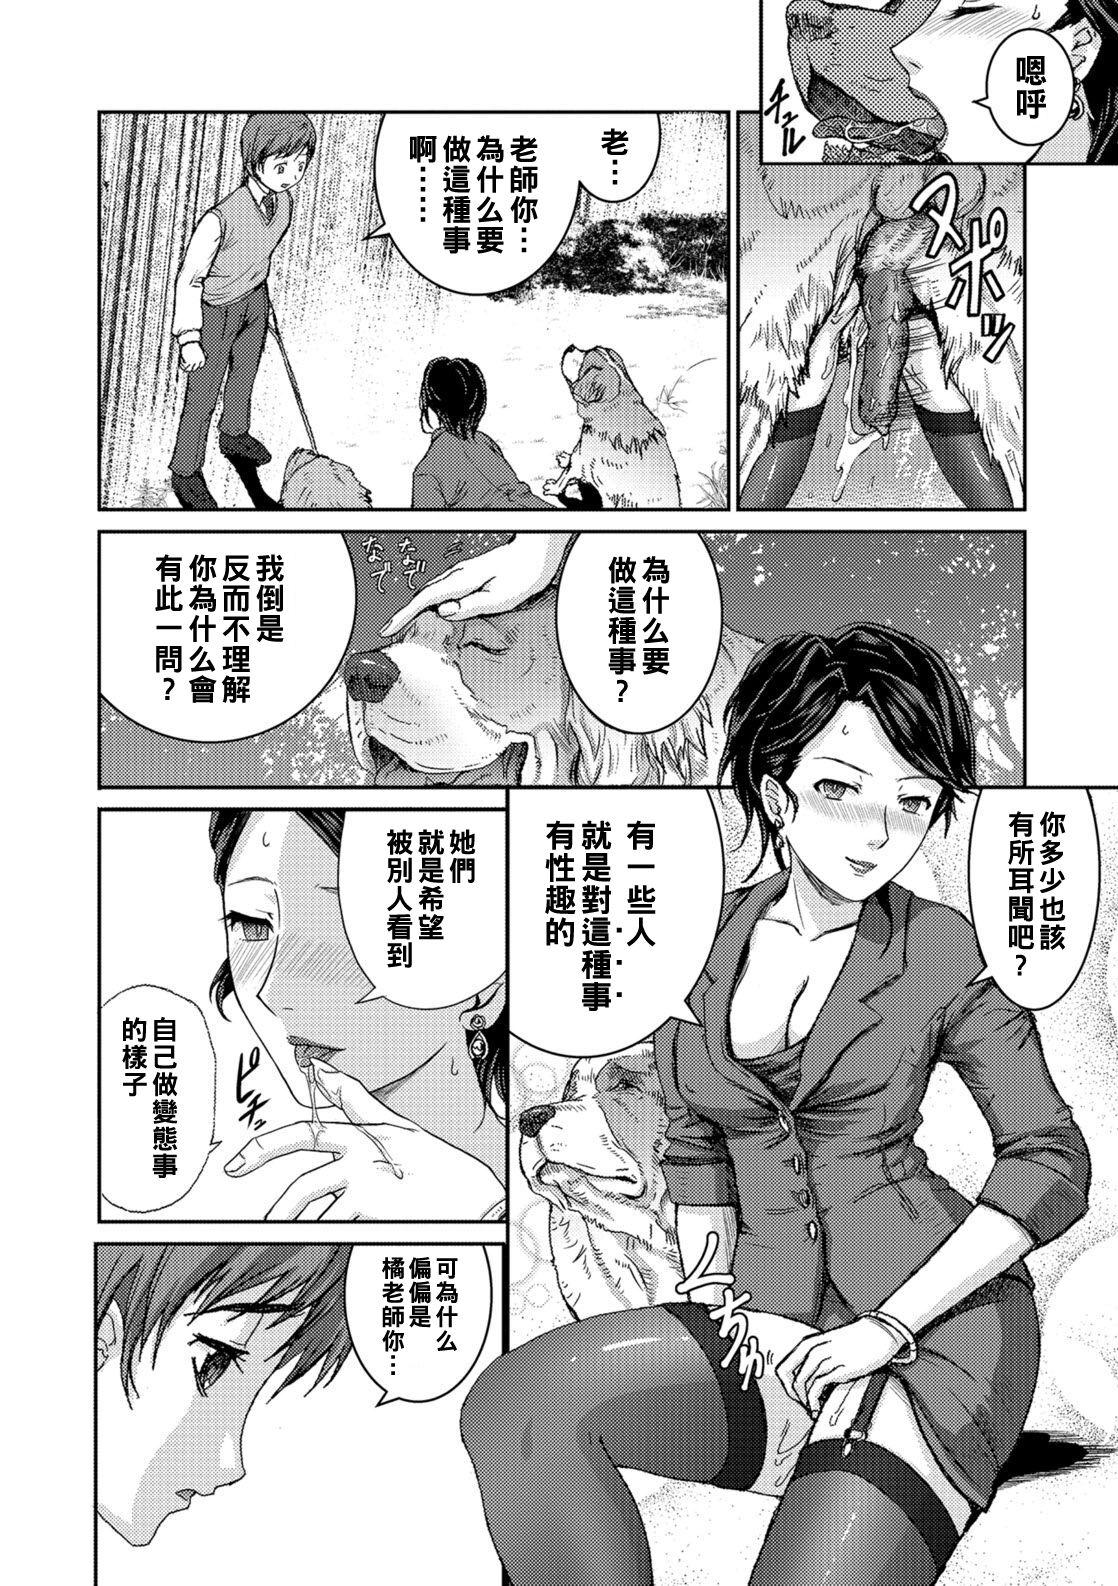 Blowjob Contest [竹壱おこめ] 仄暗き森の隷属 -The SUIT and DOG-（Chinese） Perfect Body - Page 10